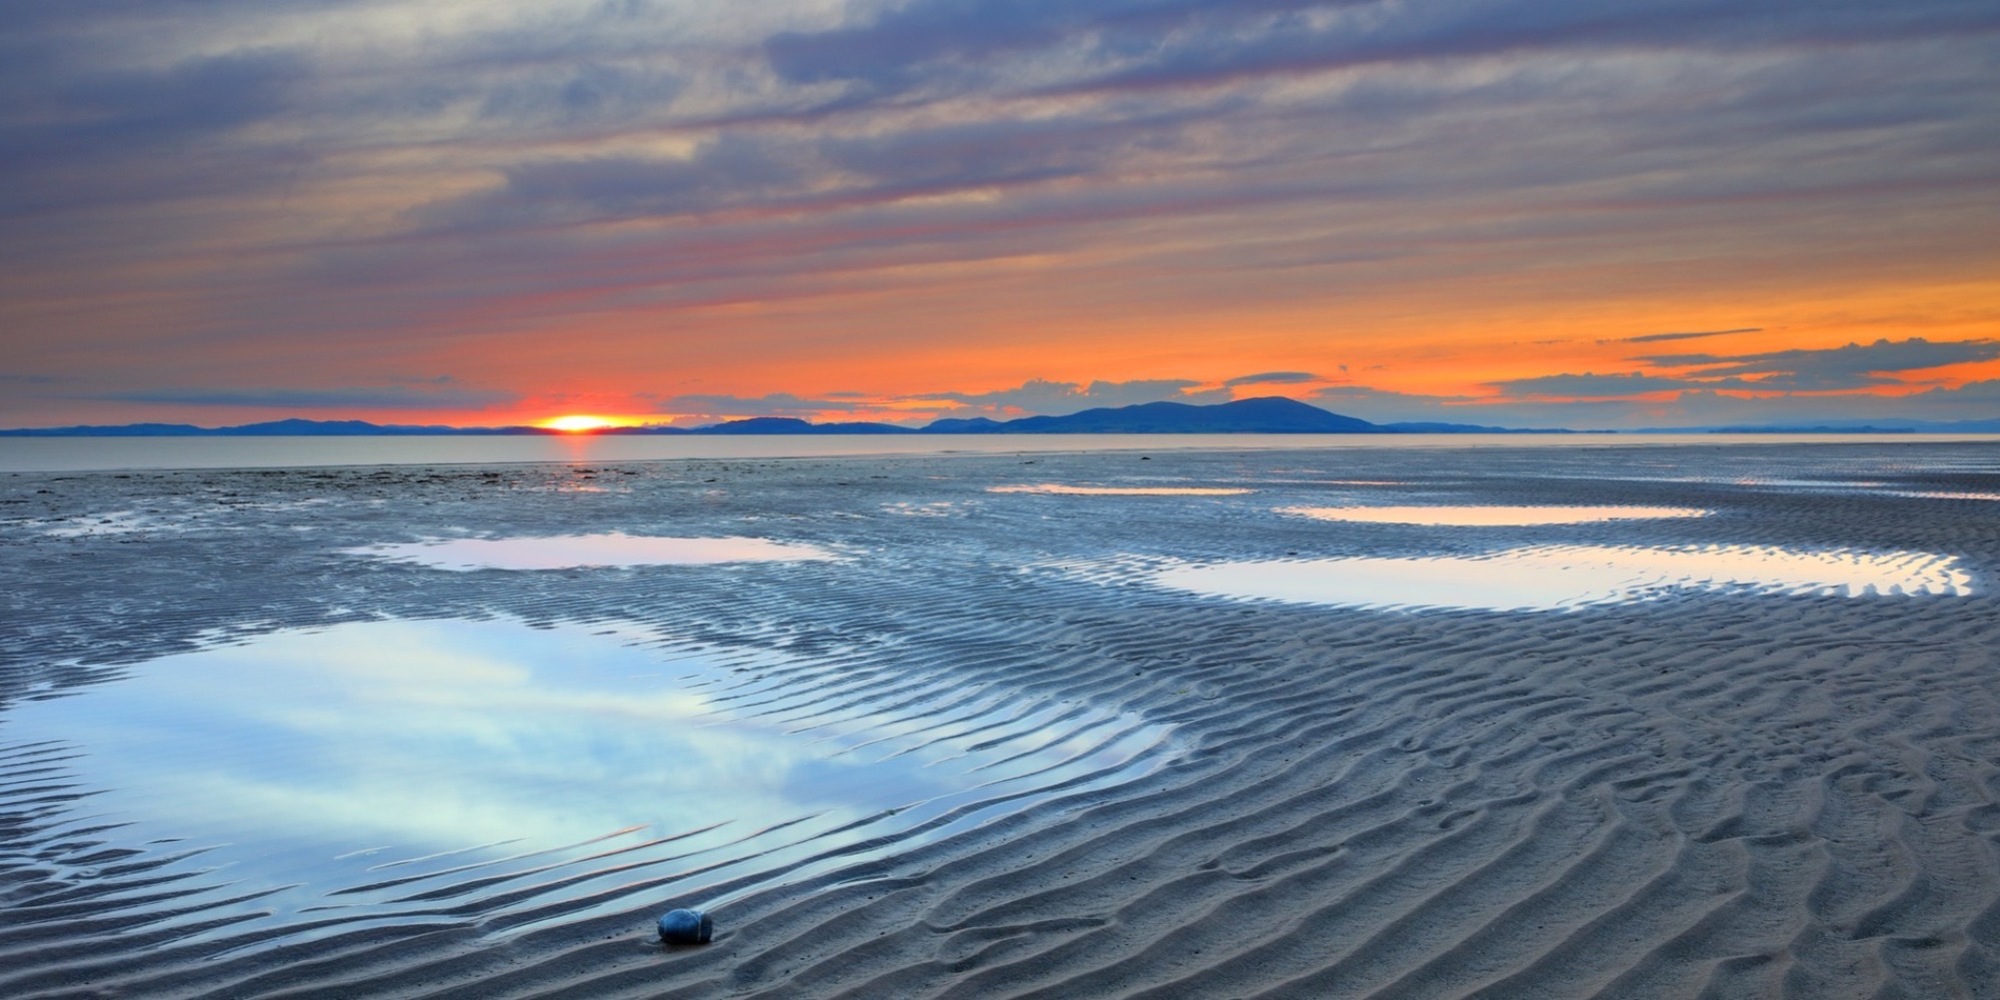 Image of puddles on a beach